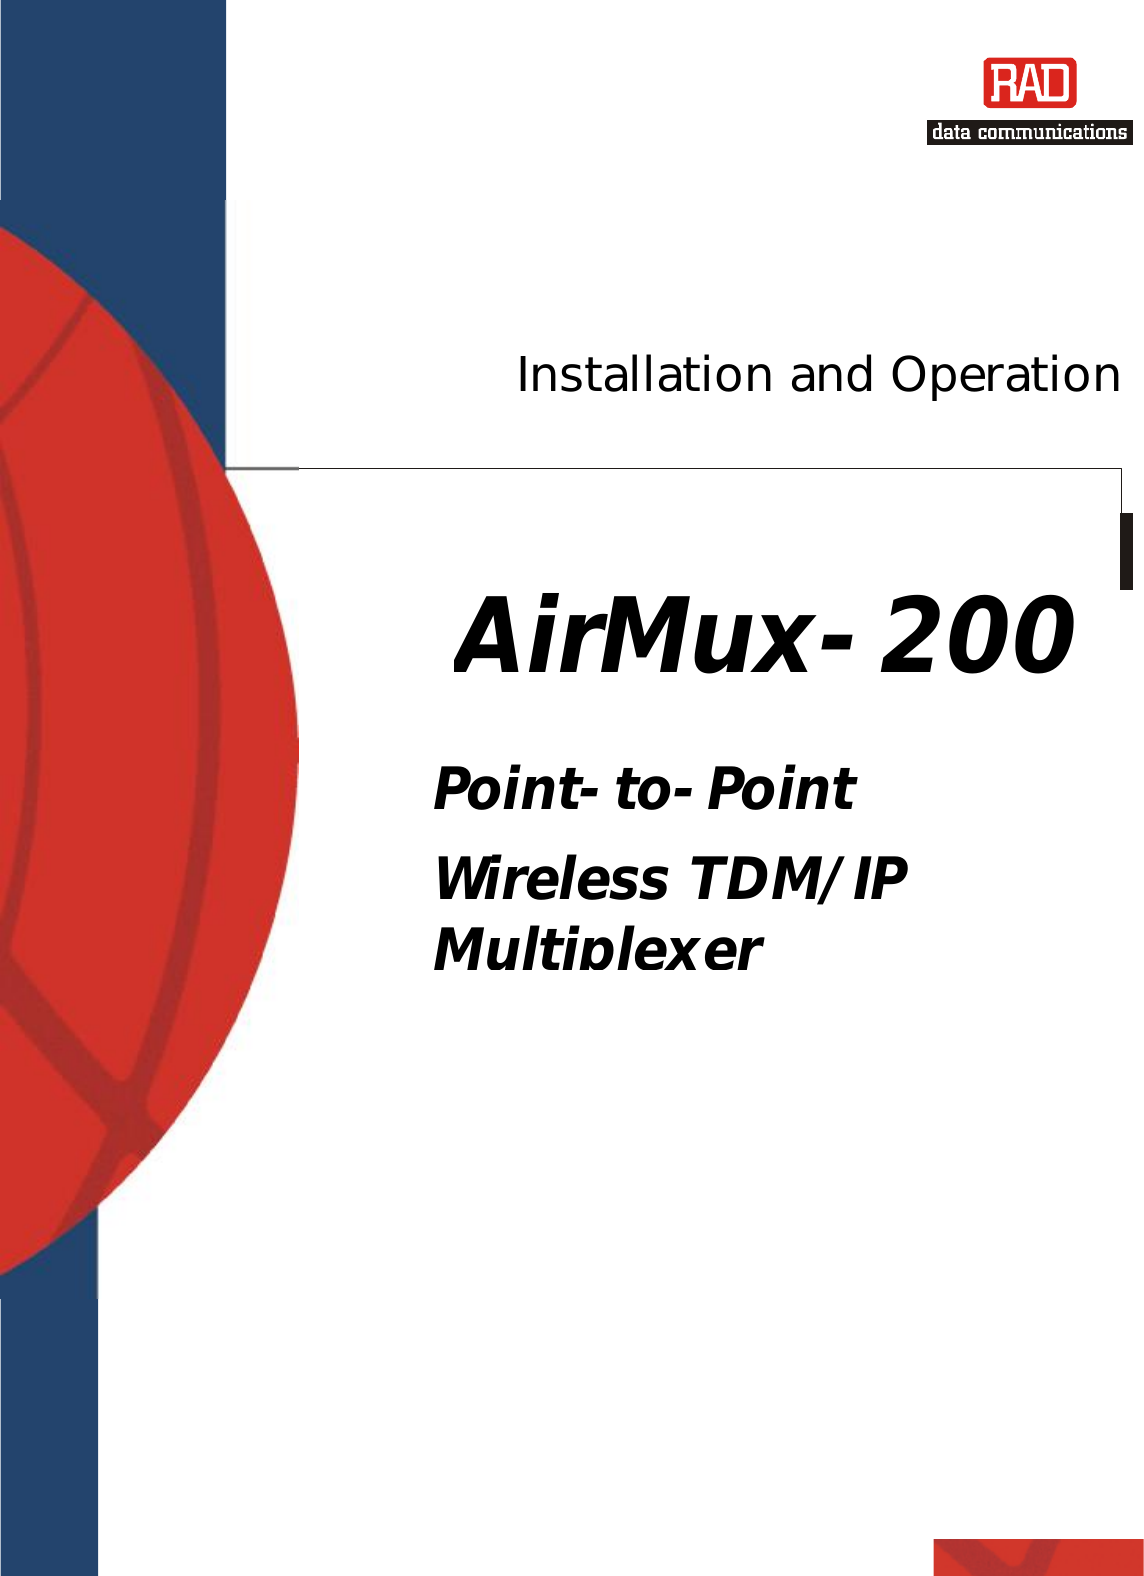 AirMux-200 Installation and Operation ManualPoint-to-Point Wireless TDM/IP Multiplexer  